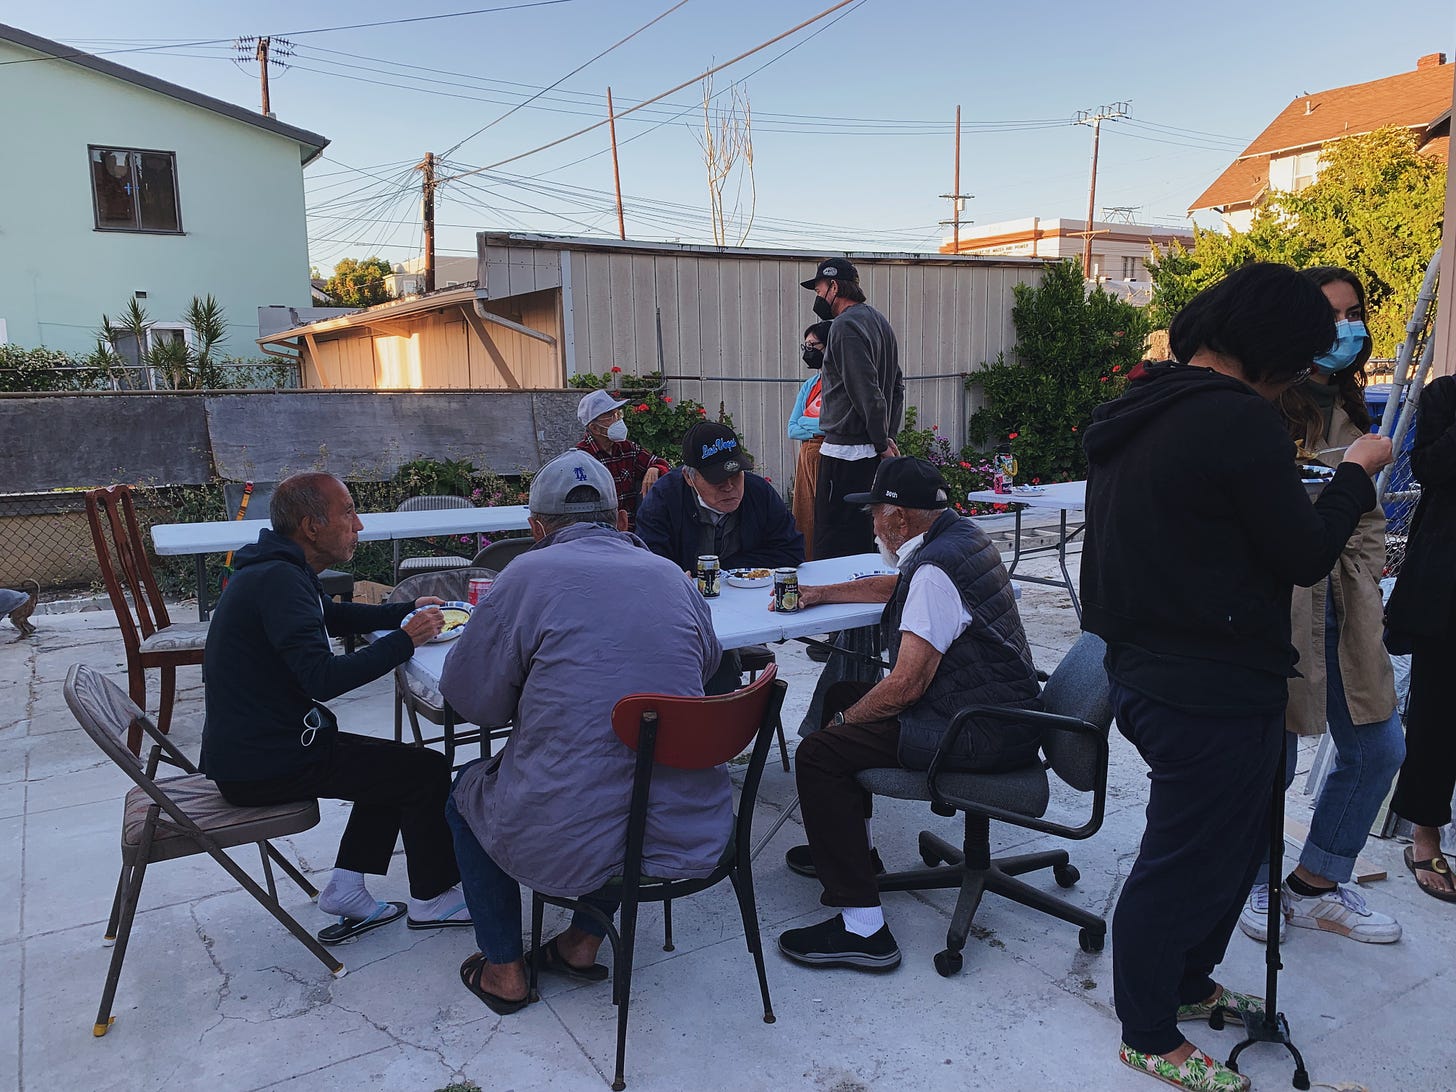 four elder Japanese tenants seated at a table and having a meal outside on a slab of concrete, surrounded by organizers and community members with apartments and electric poles in the background 